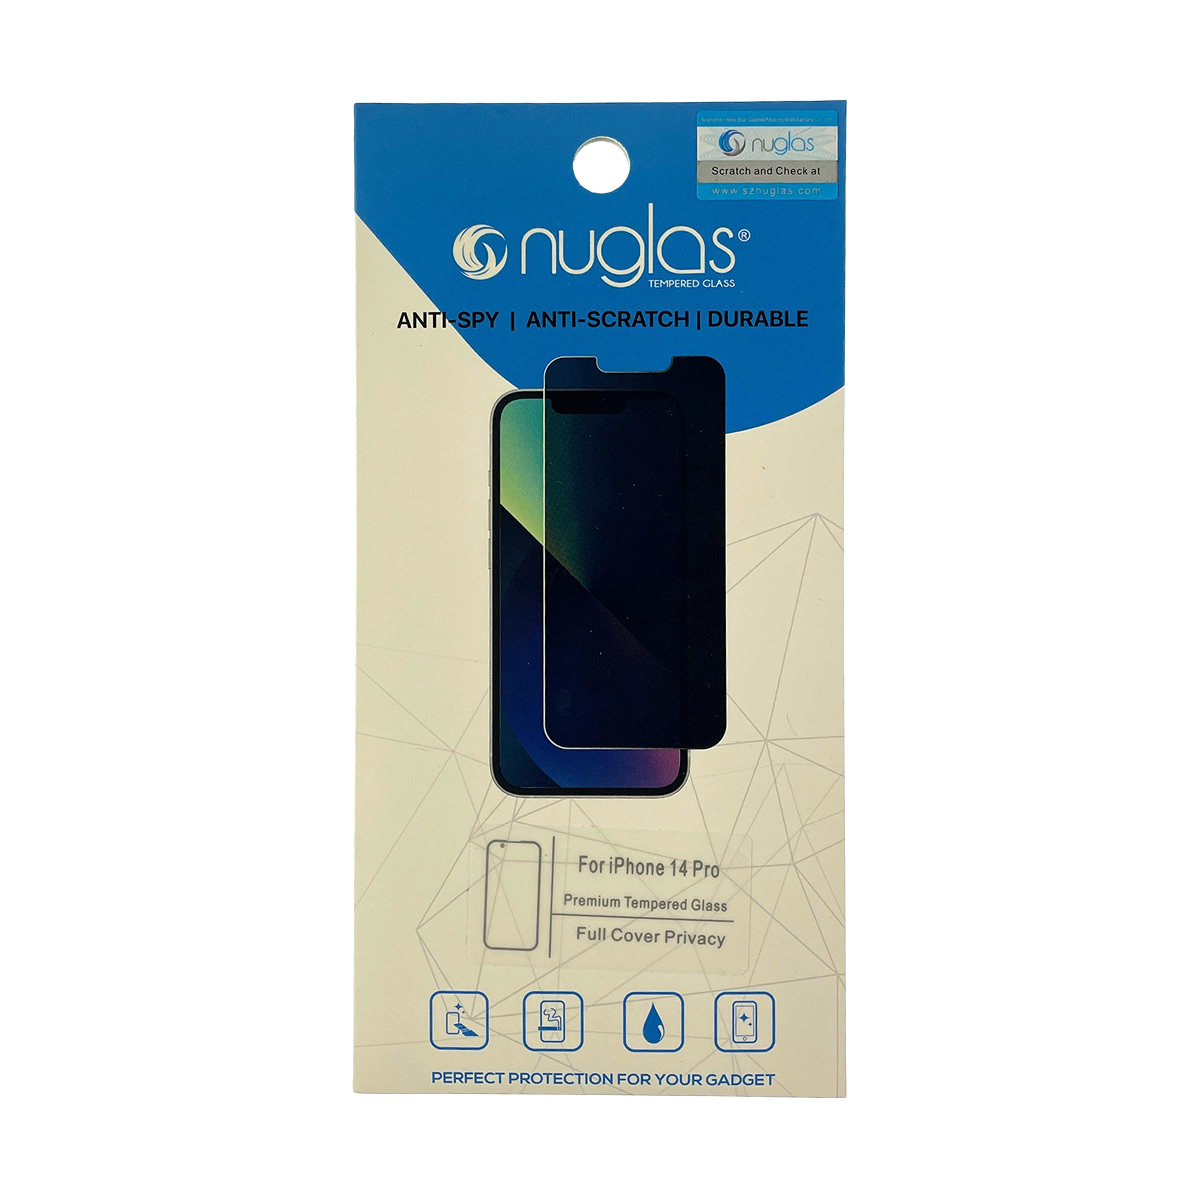 Nuglas Tempered Privacy Glass Screen Protector for the iPhone 14 Pro